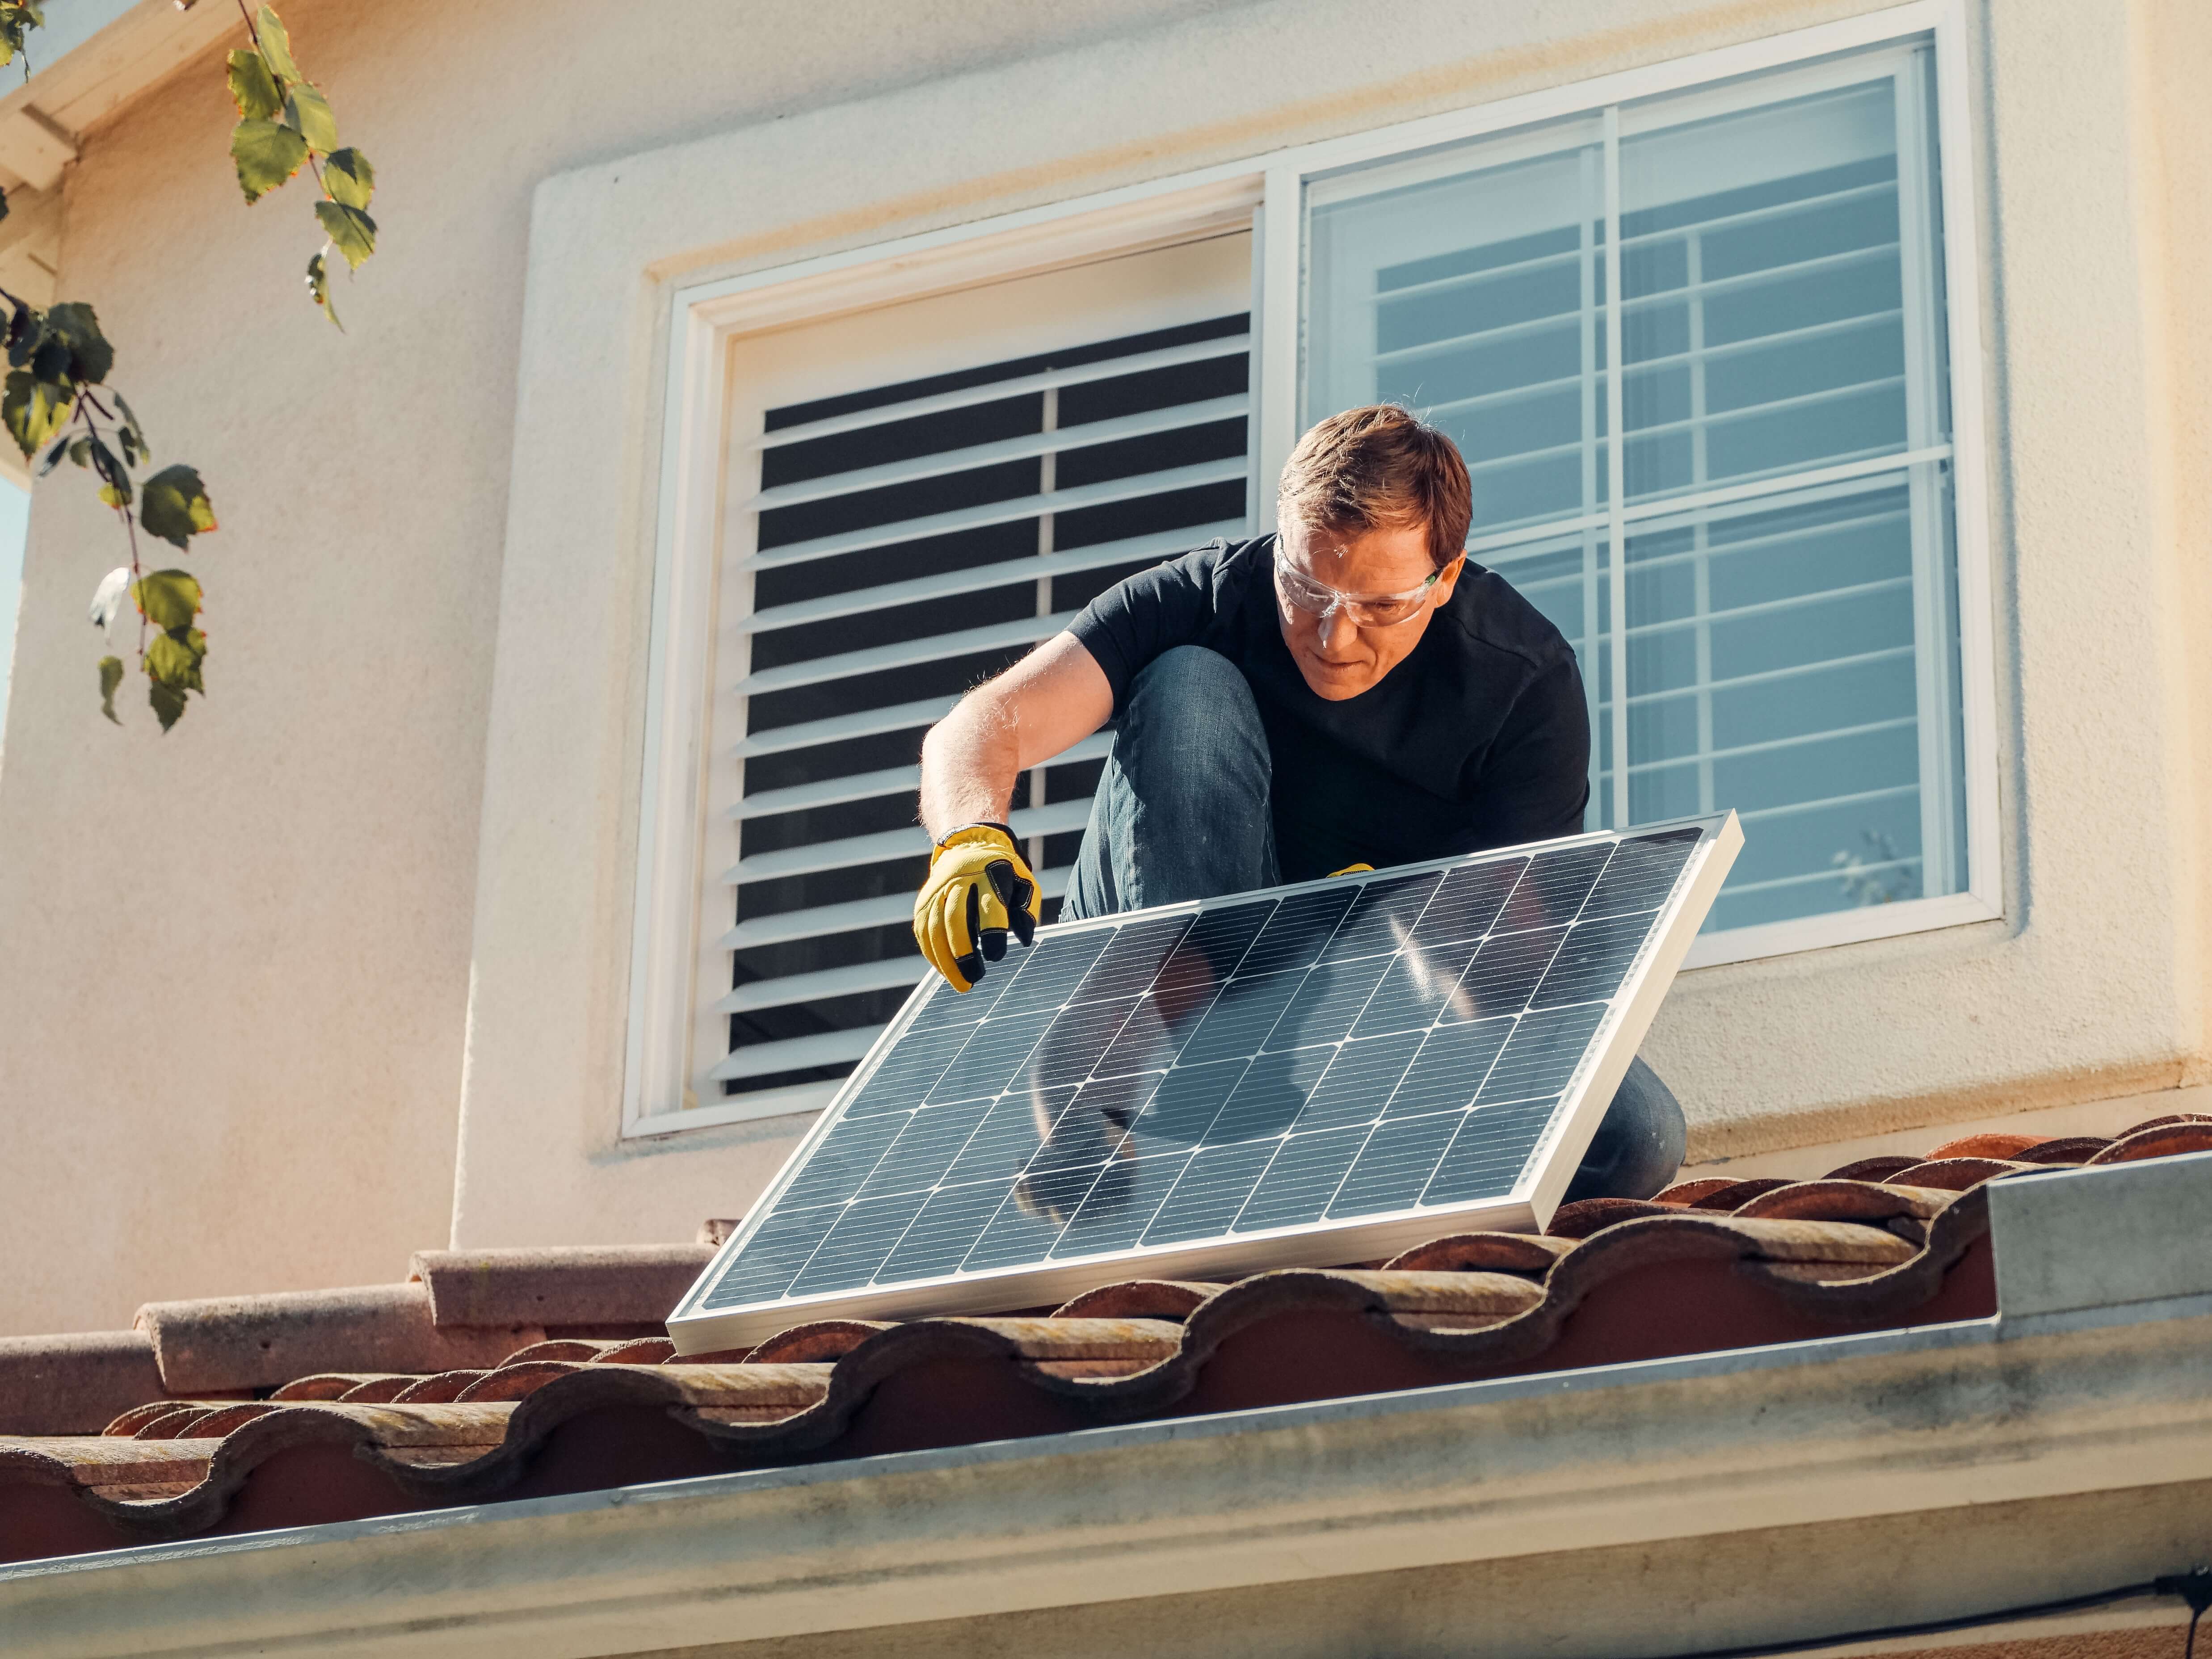 A man installing solar panels to make a house more sustainable.